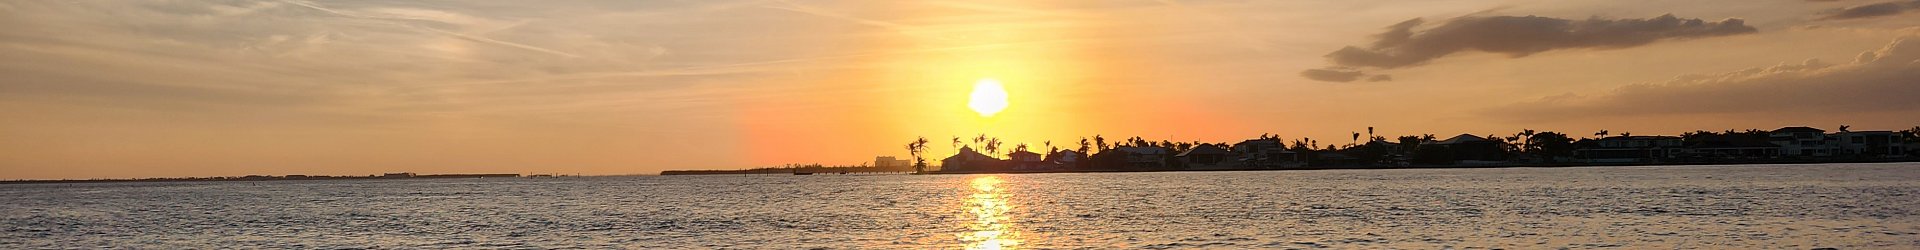 sun-island-cape-coral-charter-boats-and-services-account-page-cover-image-sunset